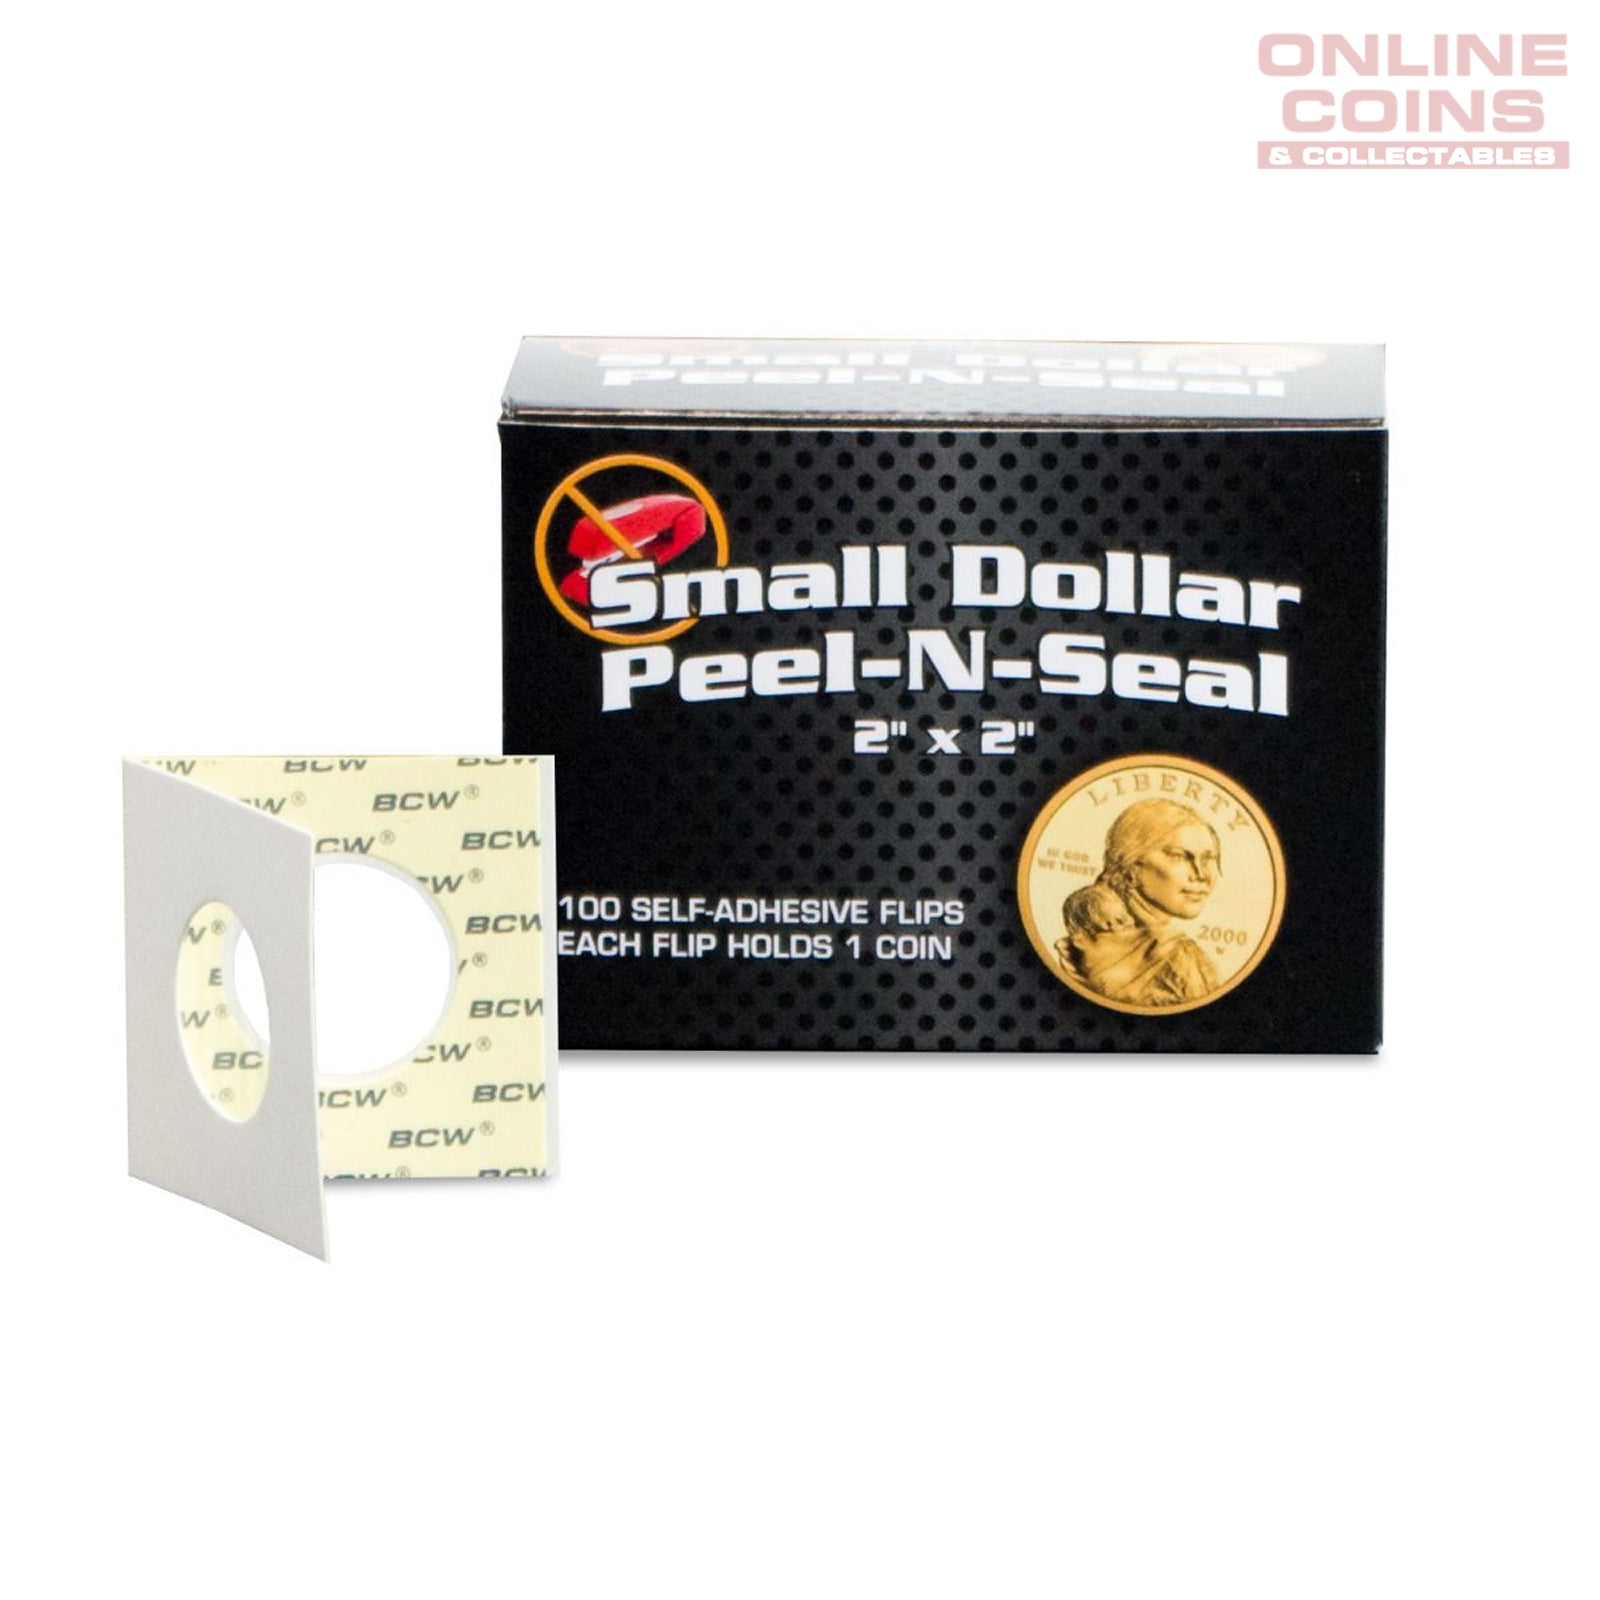 Peel-N-Seal Flips 2x2 - Adhesive - Small Dollar - 100 pack (Suitable for Australian $1, Half Penny, 10c and Shilling Coins)